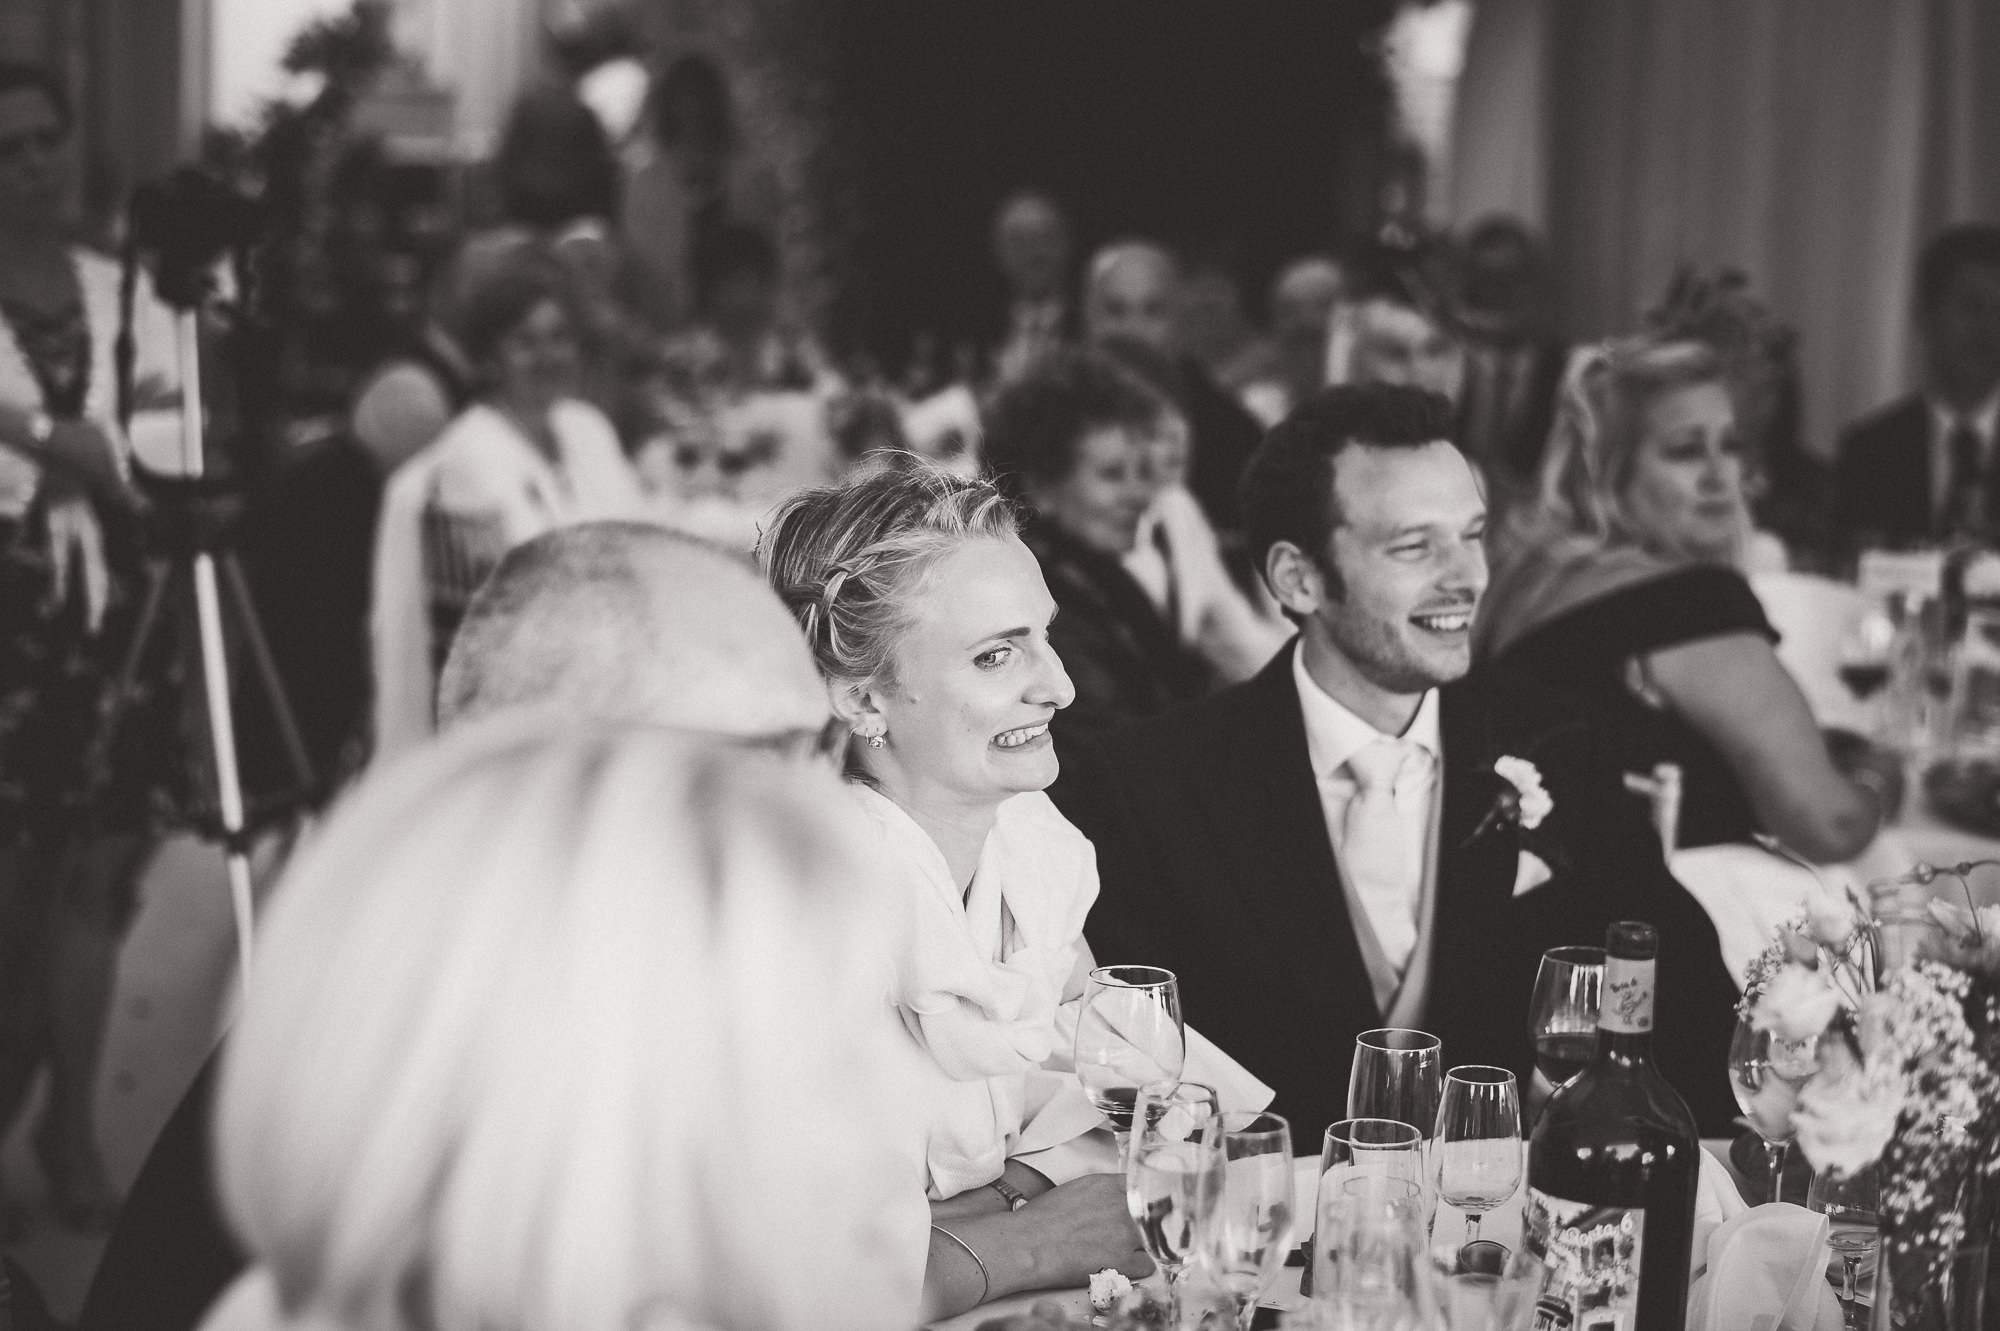 A wedding photo of a bride and groom at a table.